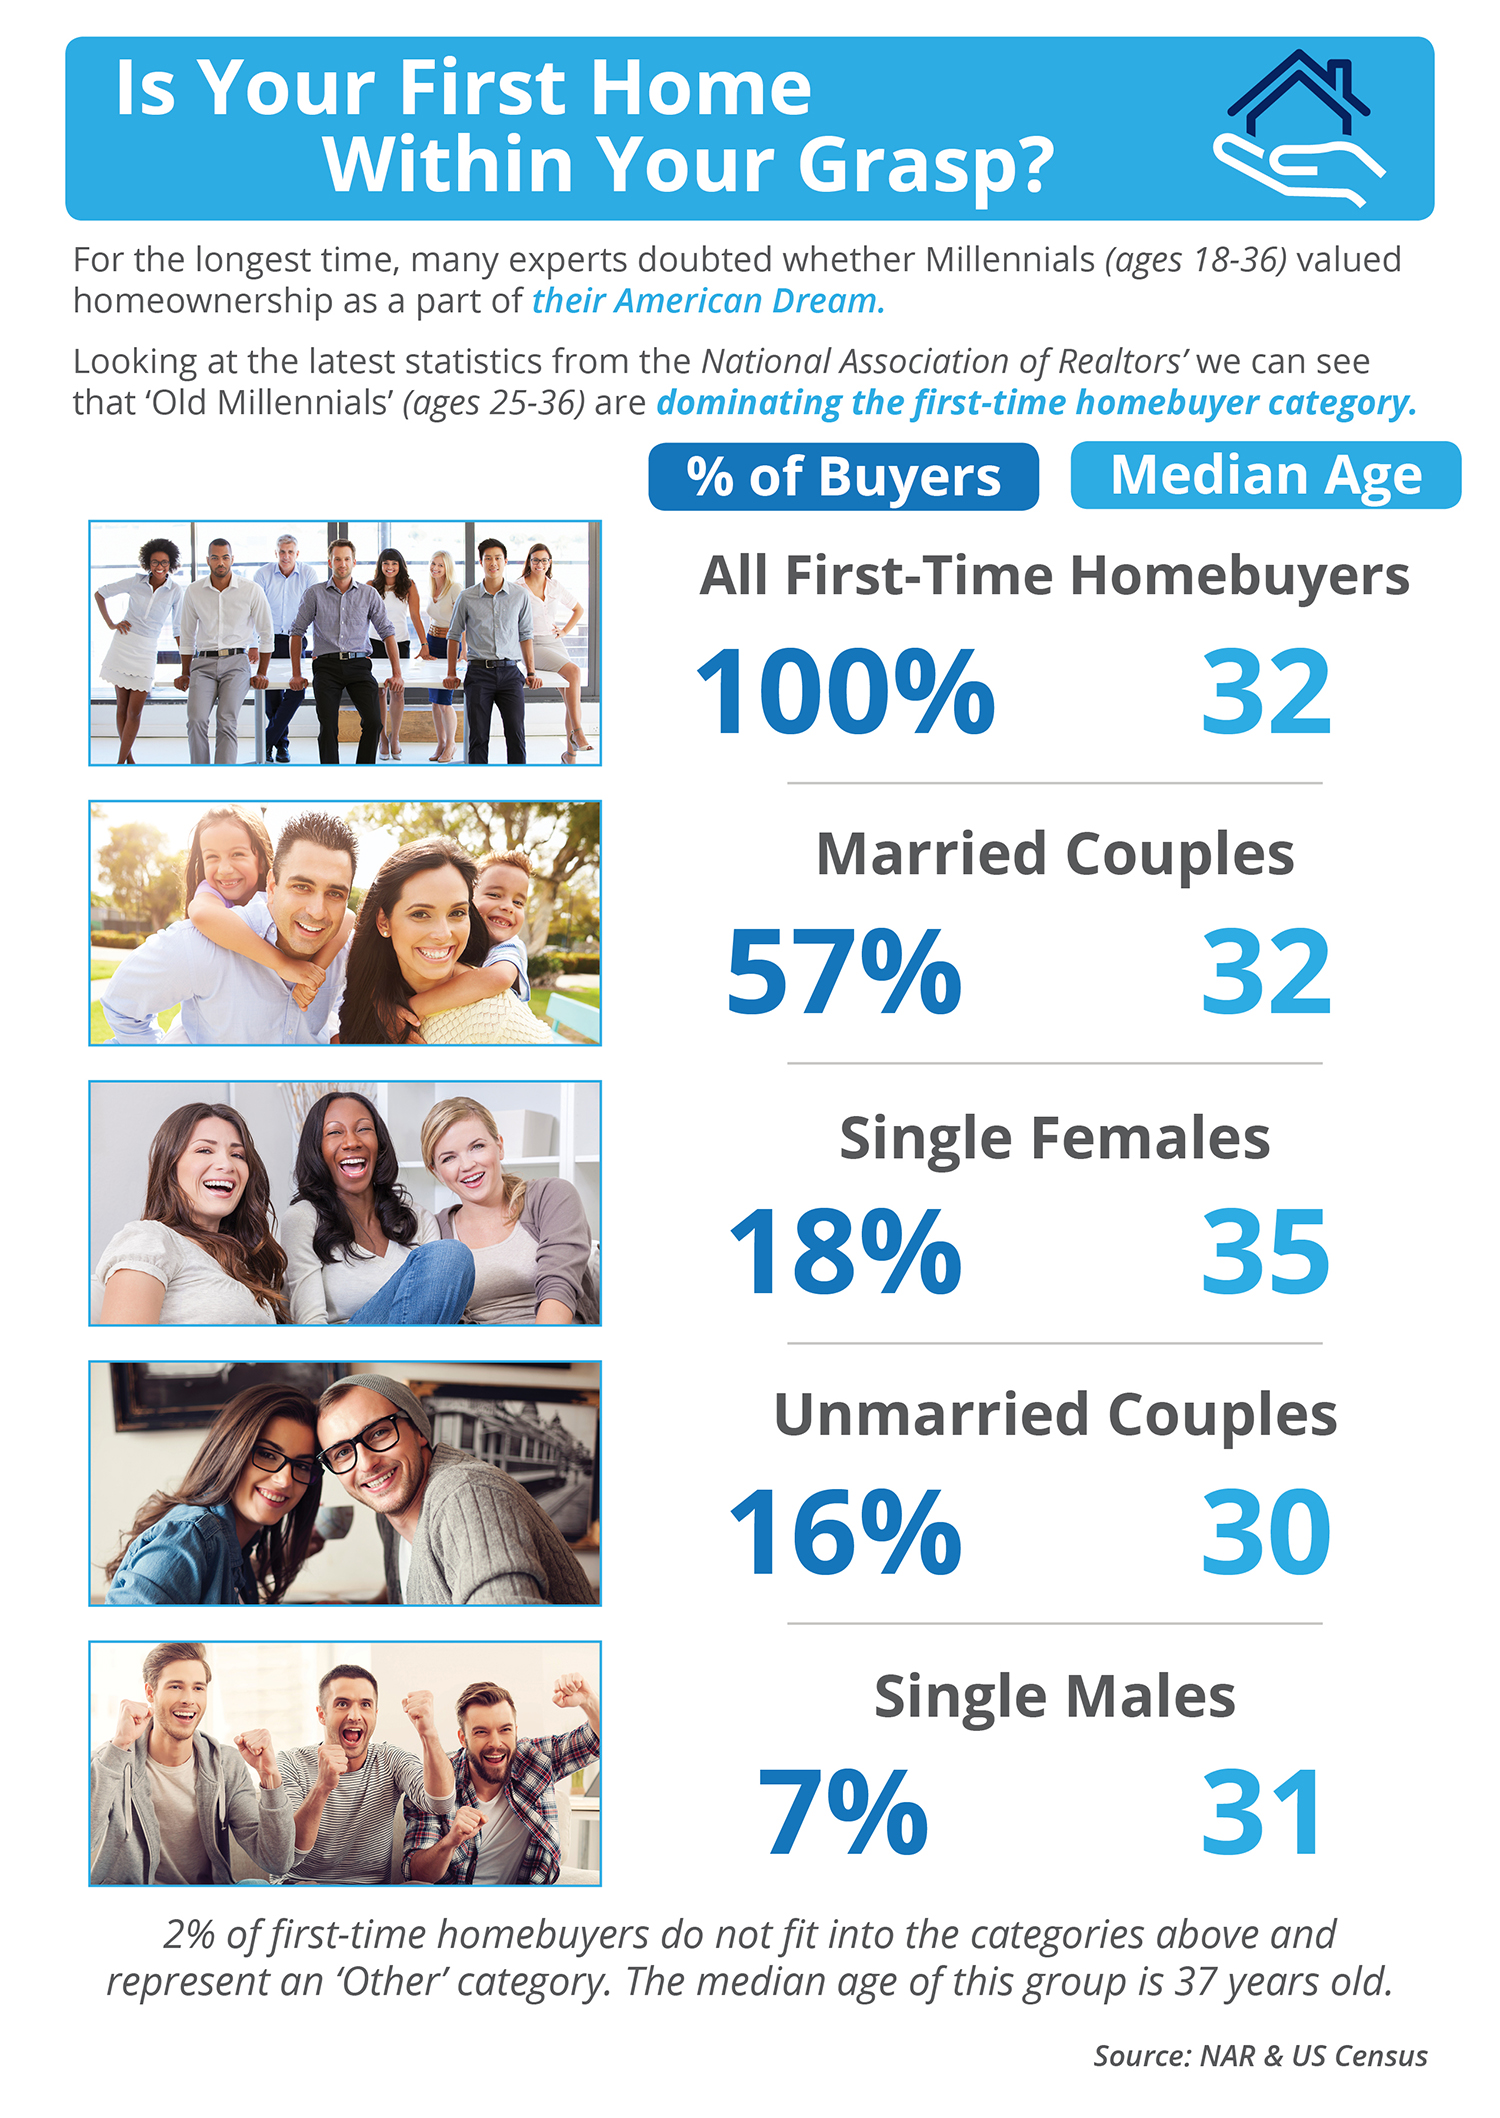 Is Your First Home Within Your Grasp Now? [INFOGRAPHIC] | Simplifying the Market